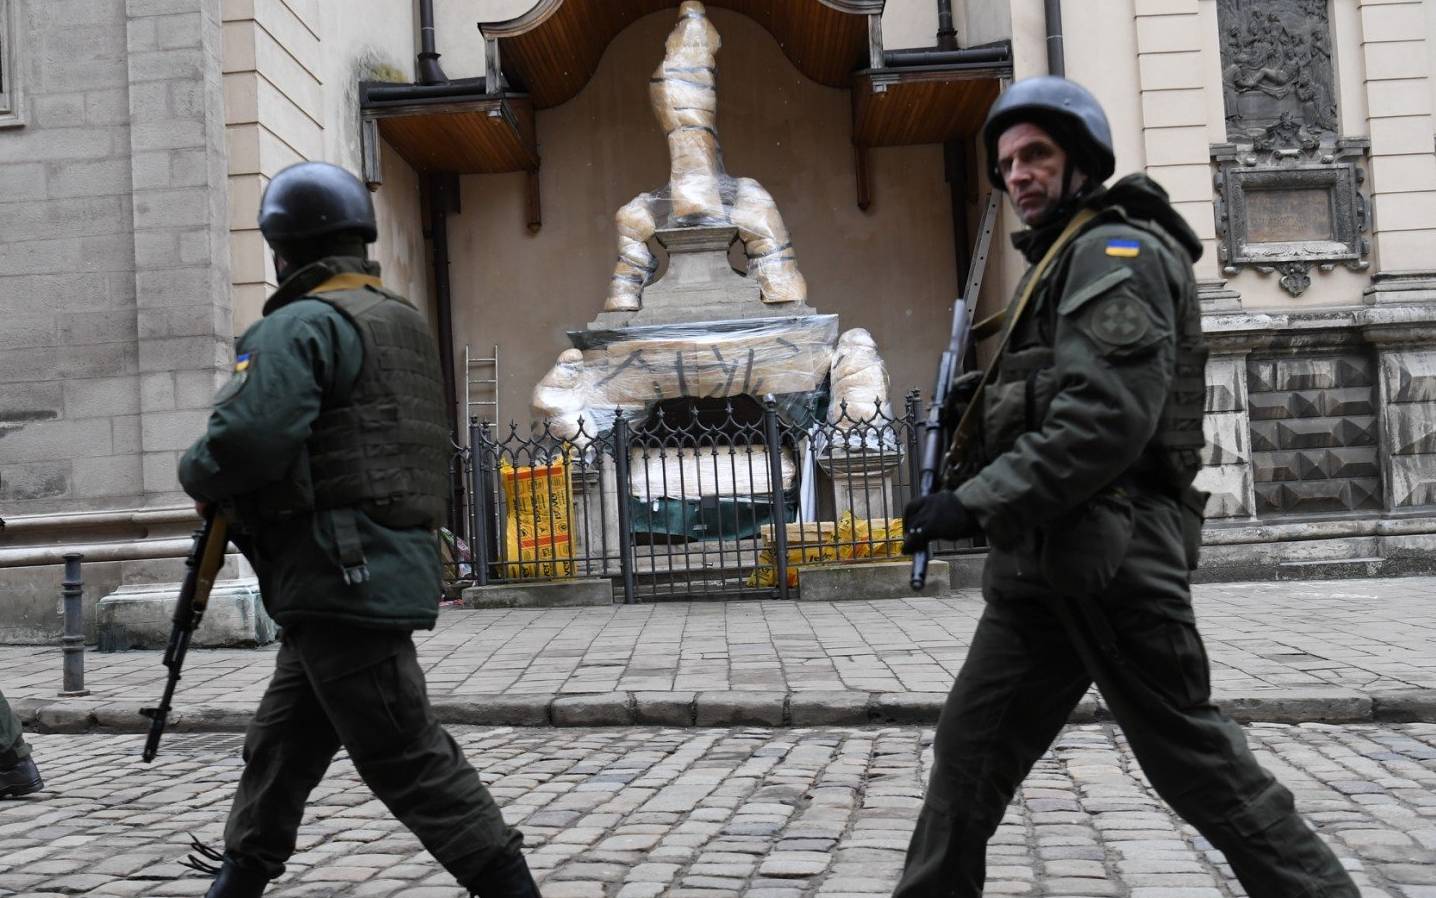 Ukrainian servicemen walk past wrapped statues at the Archcathedral Basilica of the Assumption of the Blessed Virgin Mary also known as Latin Cathedral in Lviv western Ukraine, on March 5, 2022. (Photo by Daniel LEAL / AFP)